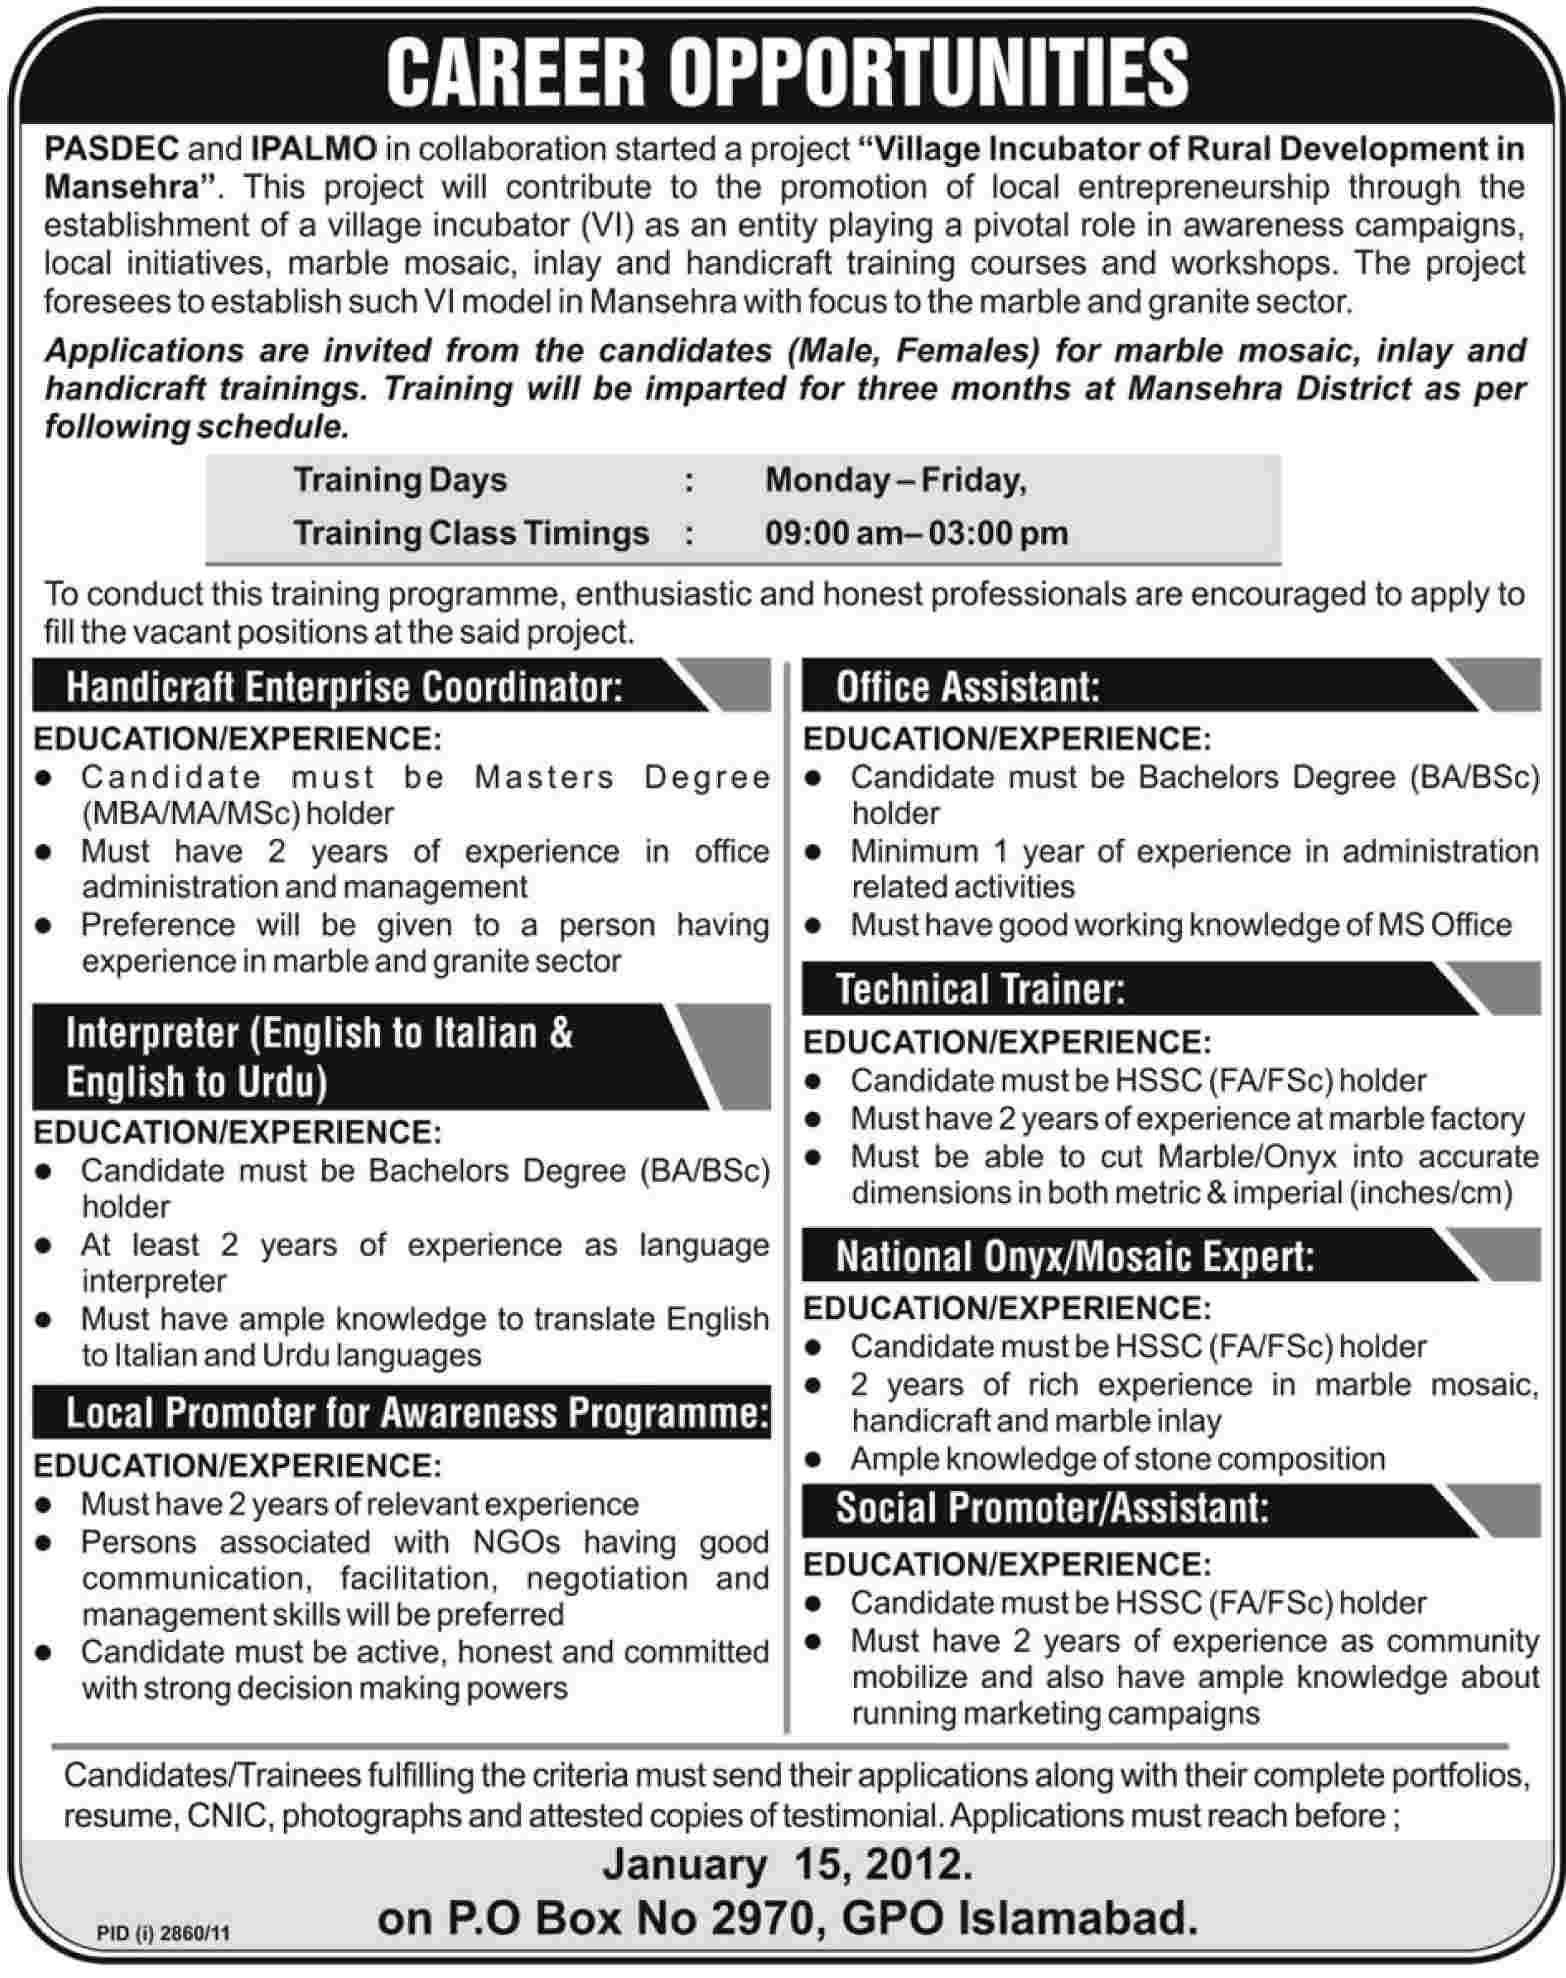 PASDEC and IPALMO Jobs Opportunities